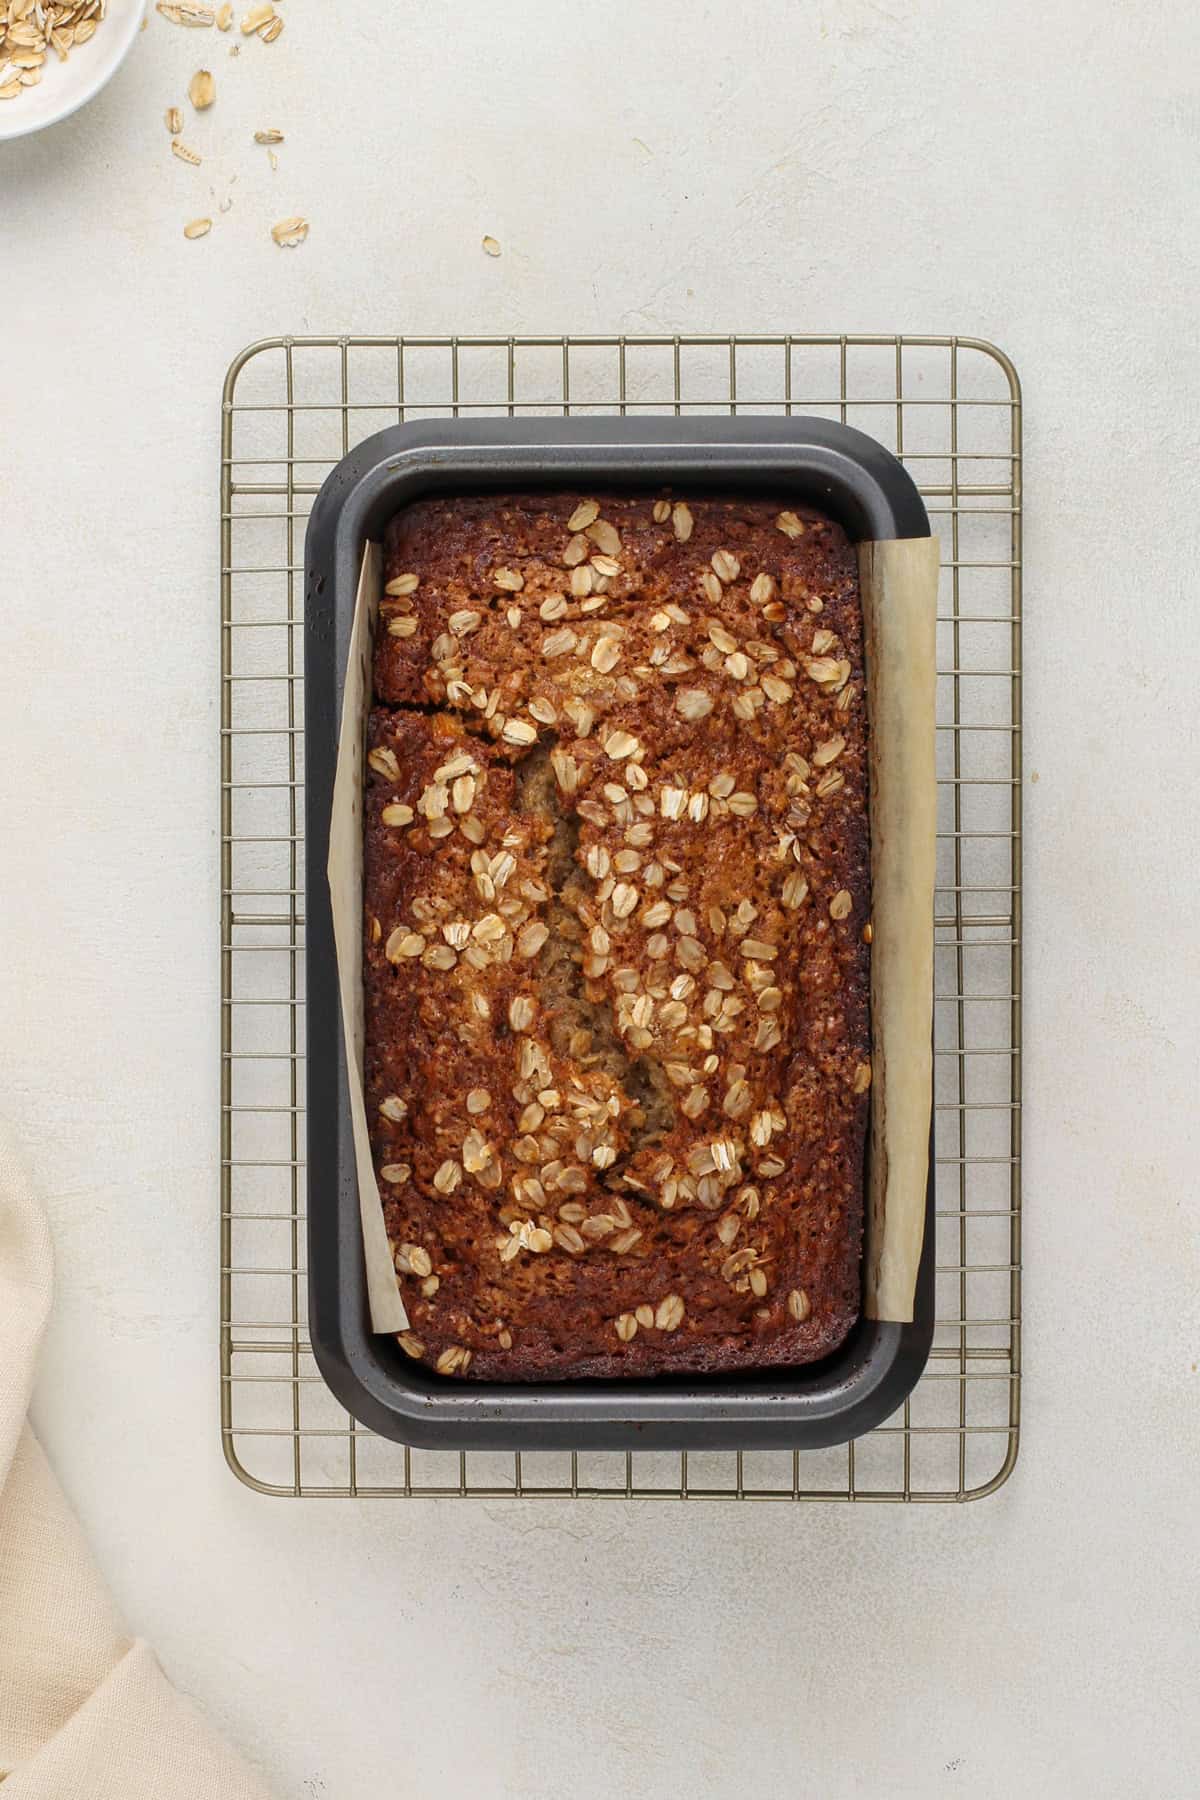 Oatmeal banana bread cooling in a loaf pan set on a wire rack.